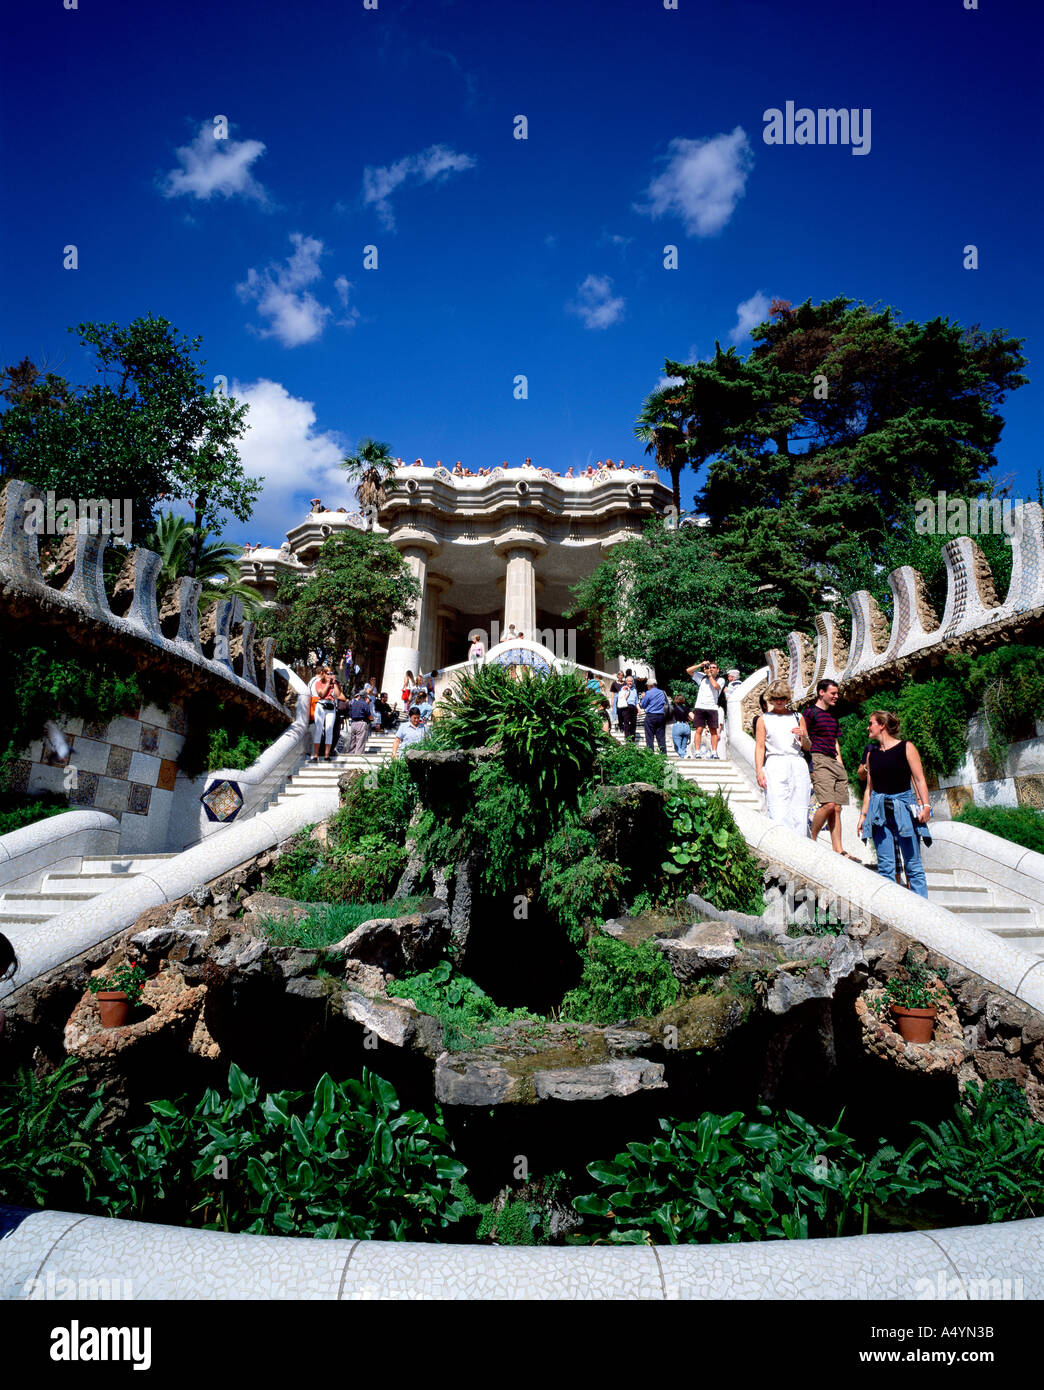 Gaudi s Parc Guell Barcelona Spain Stock Photo